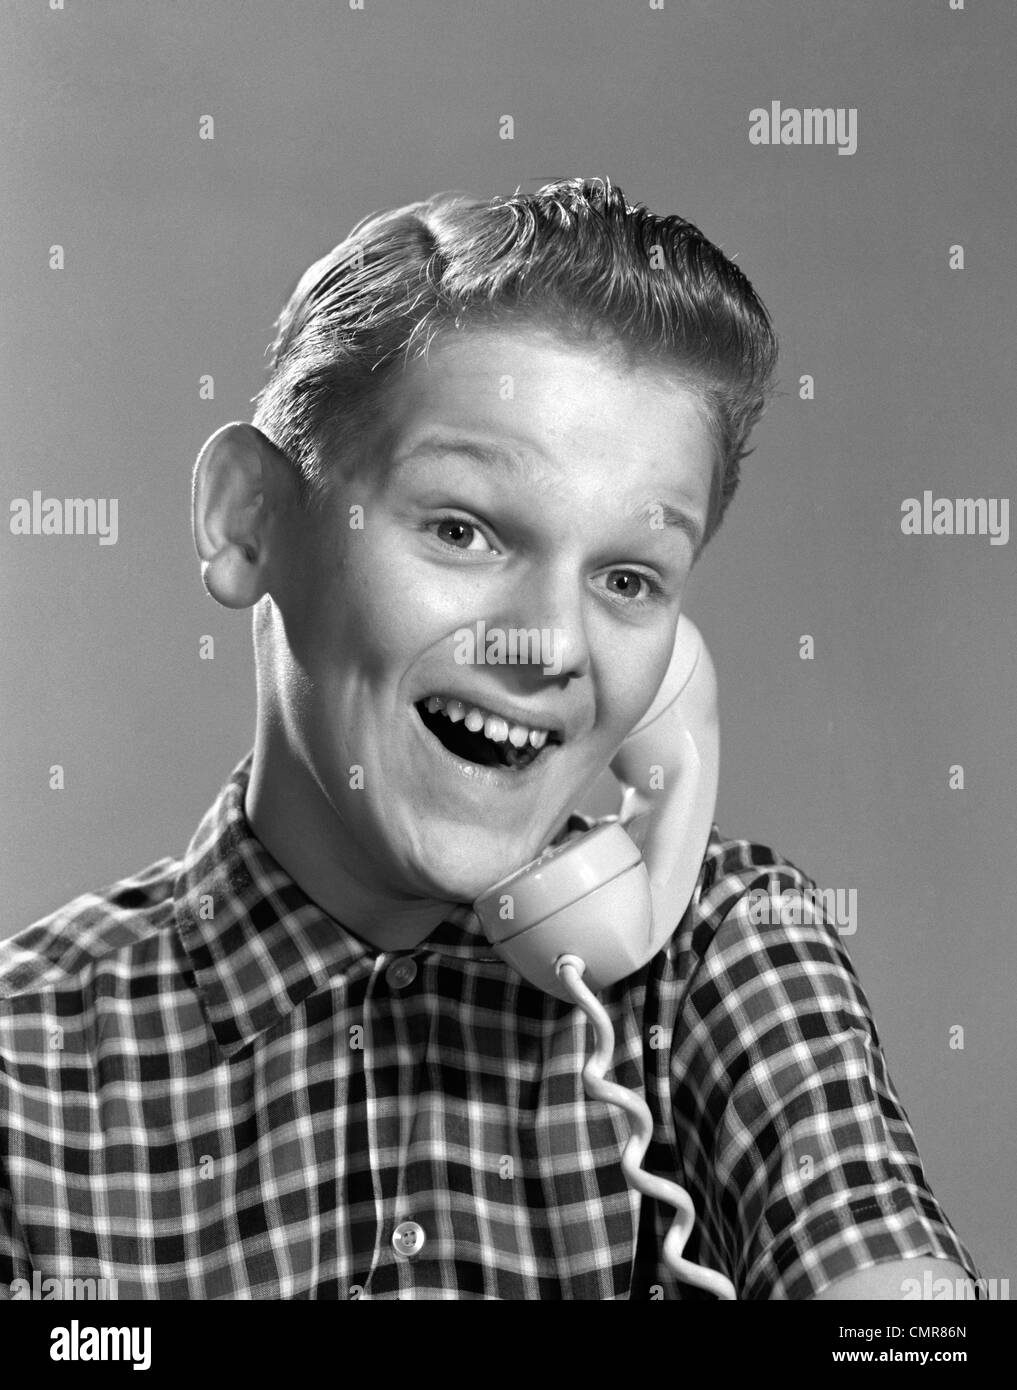 1960s BOY ON TELEPHONE WITH EXCITED EXPRESSION Stock Photo